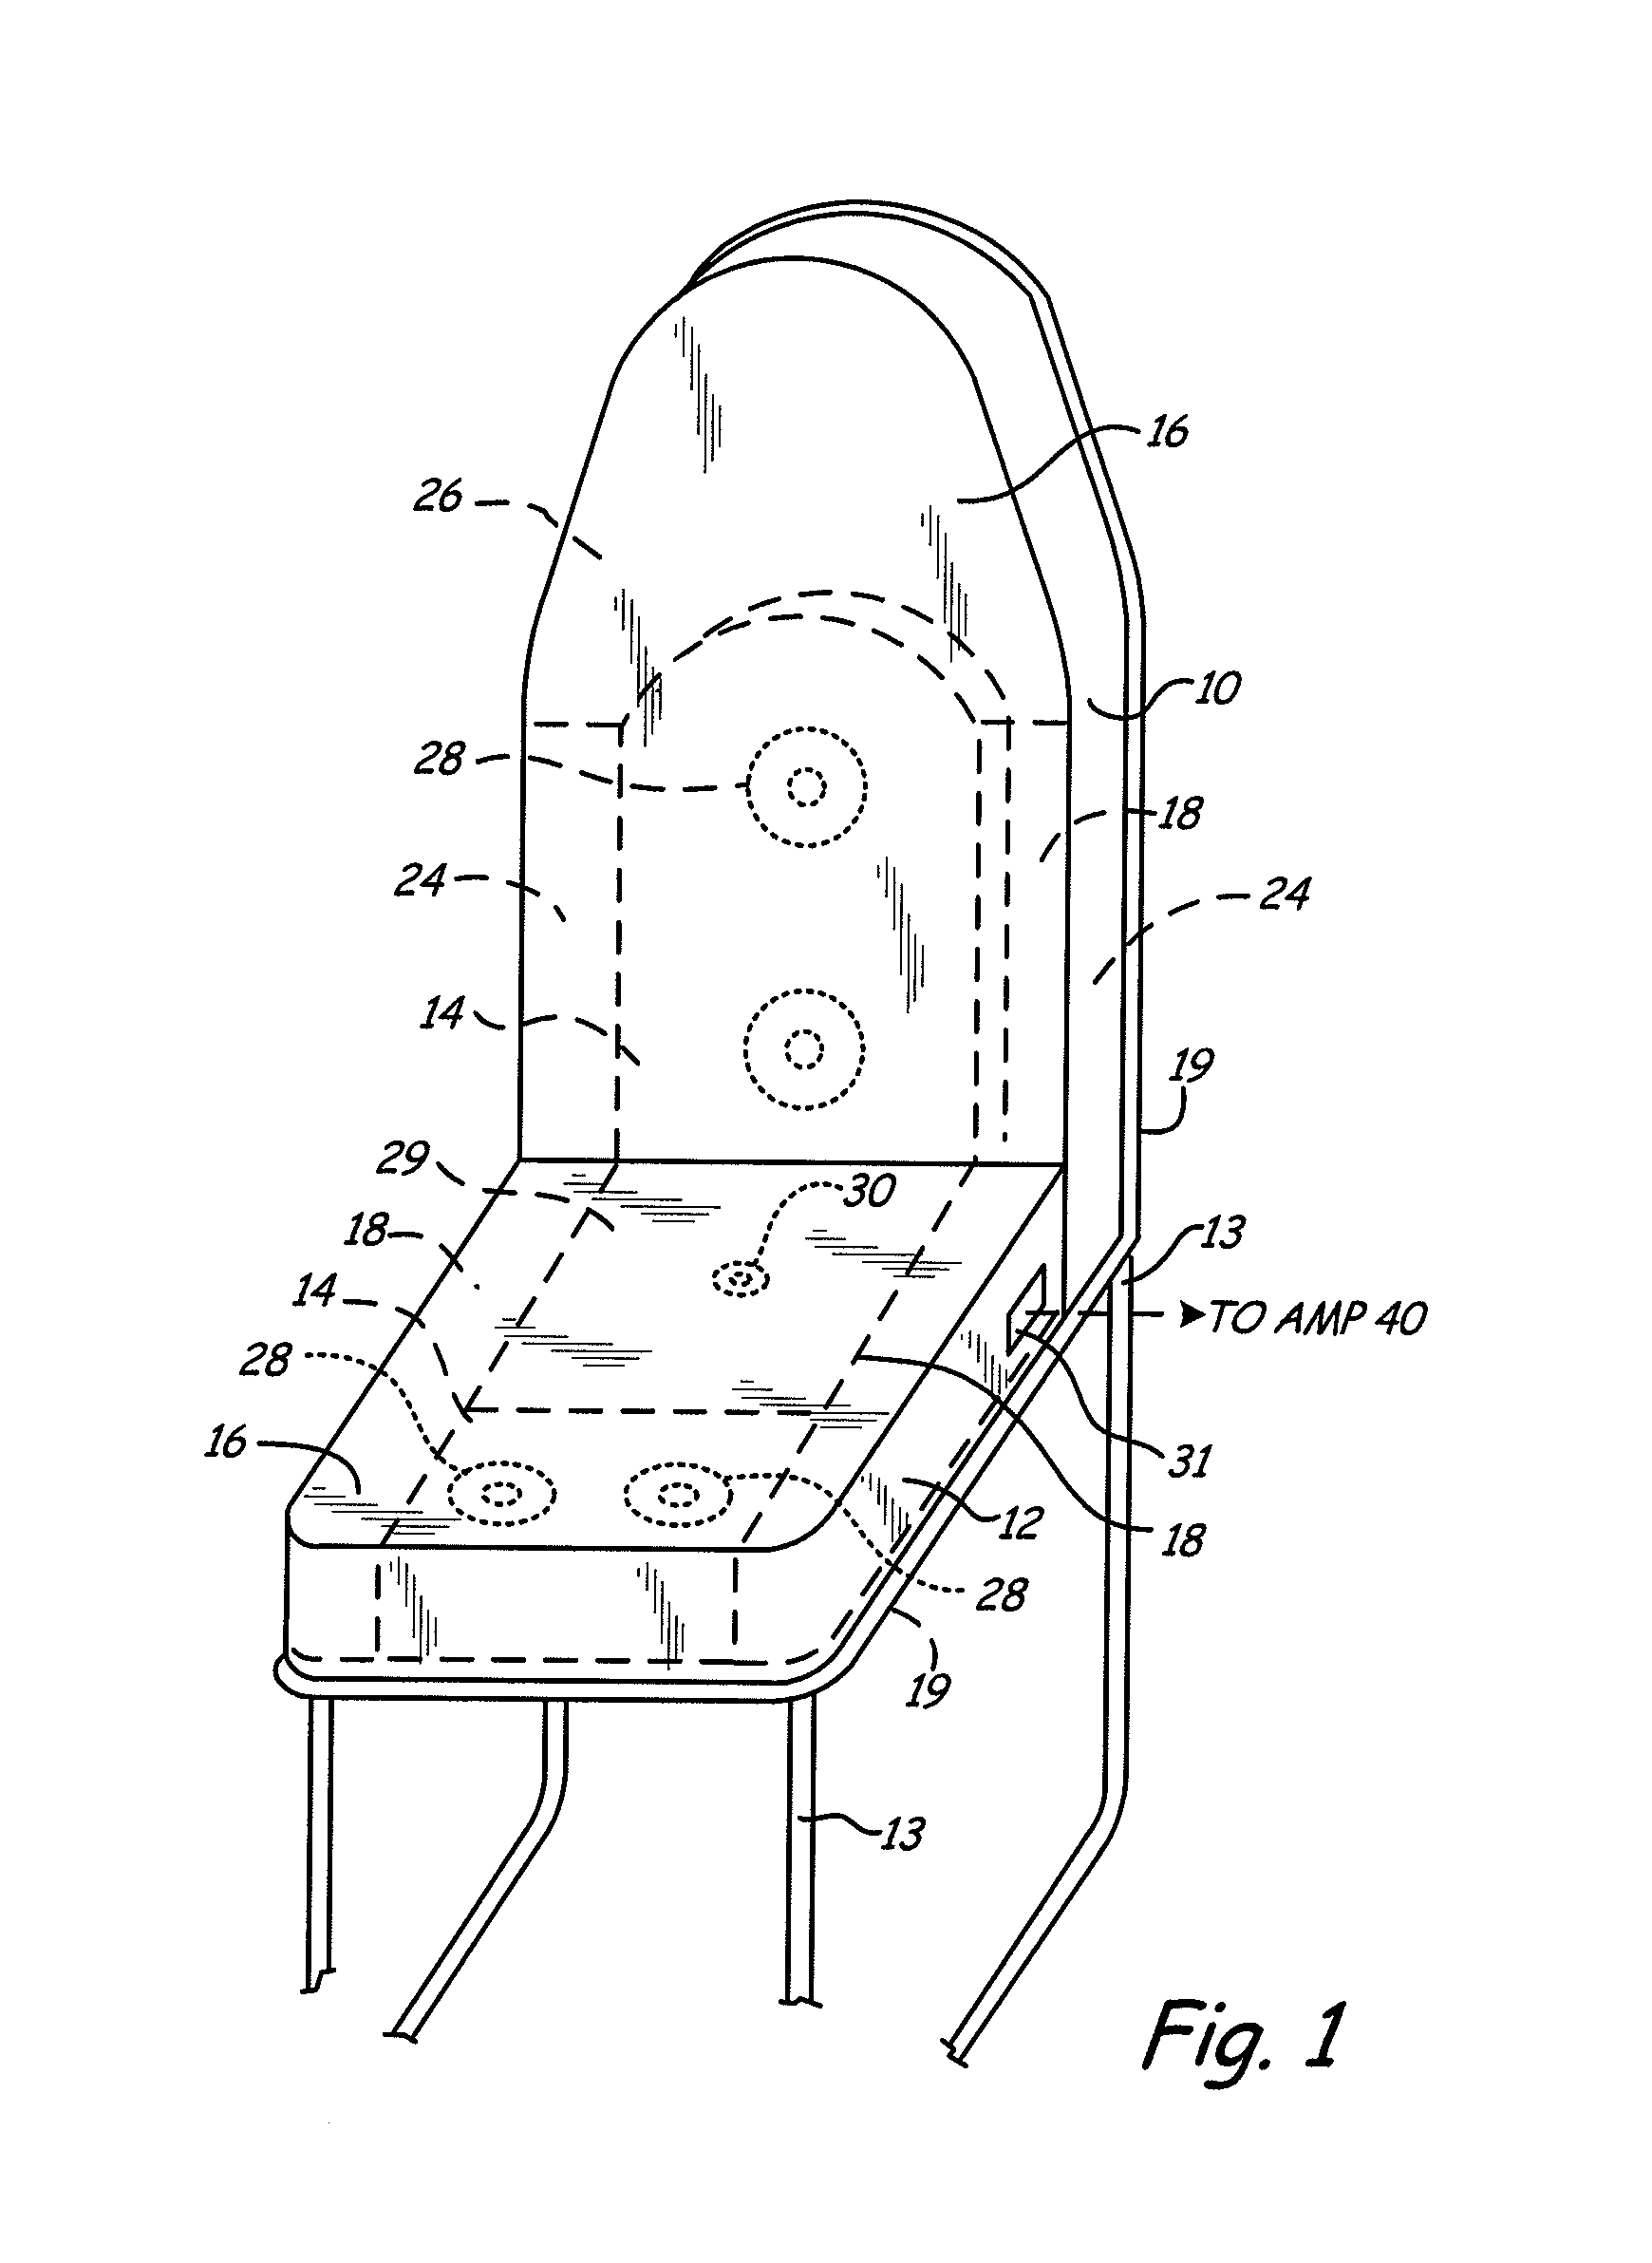 Sound and vibration transmission pad and system